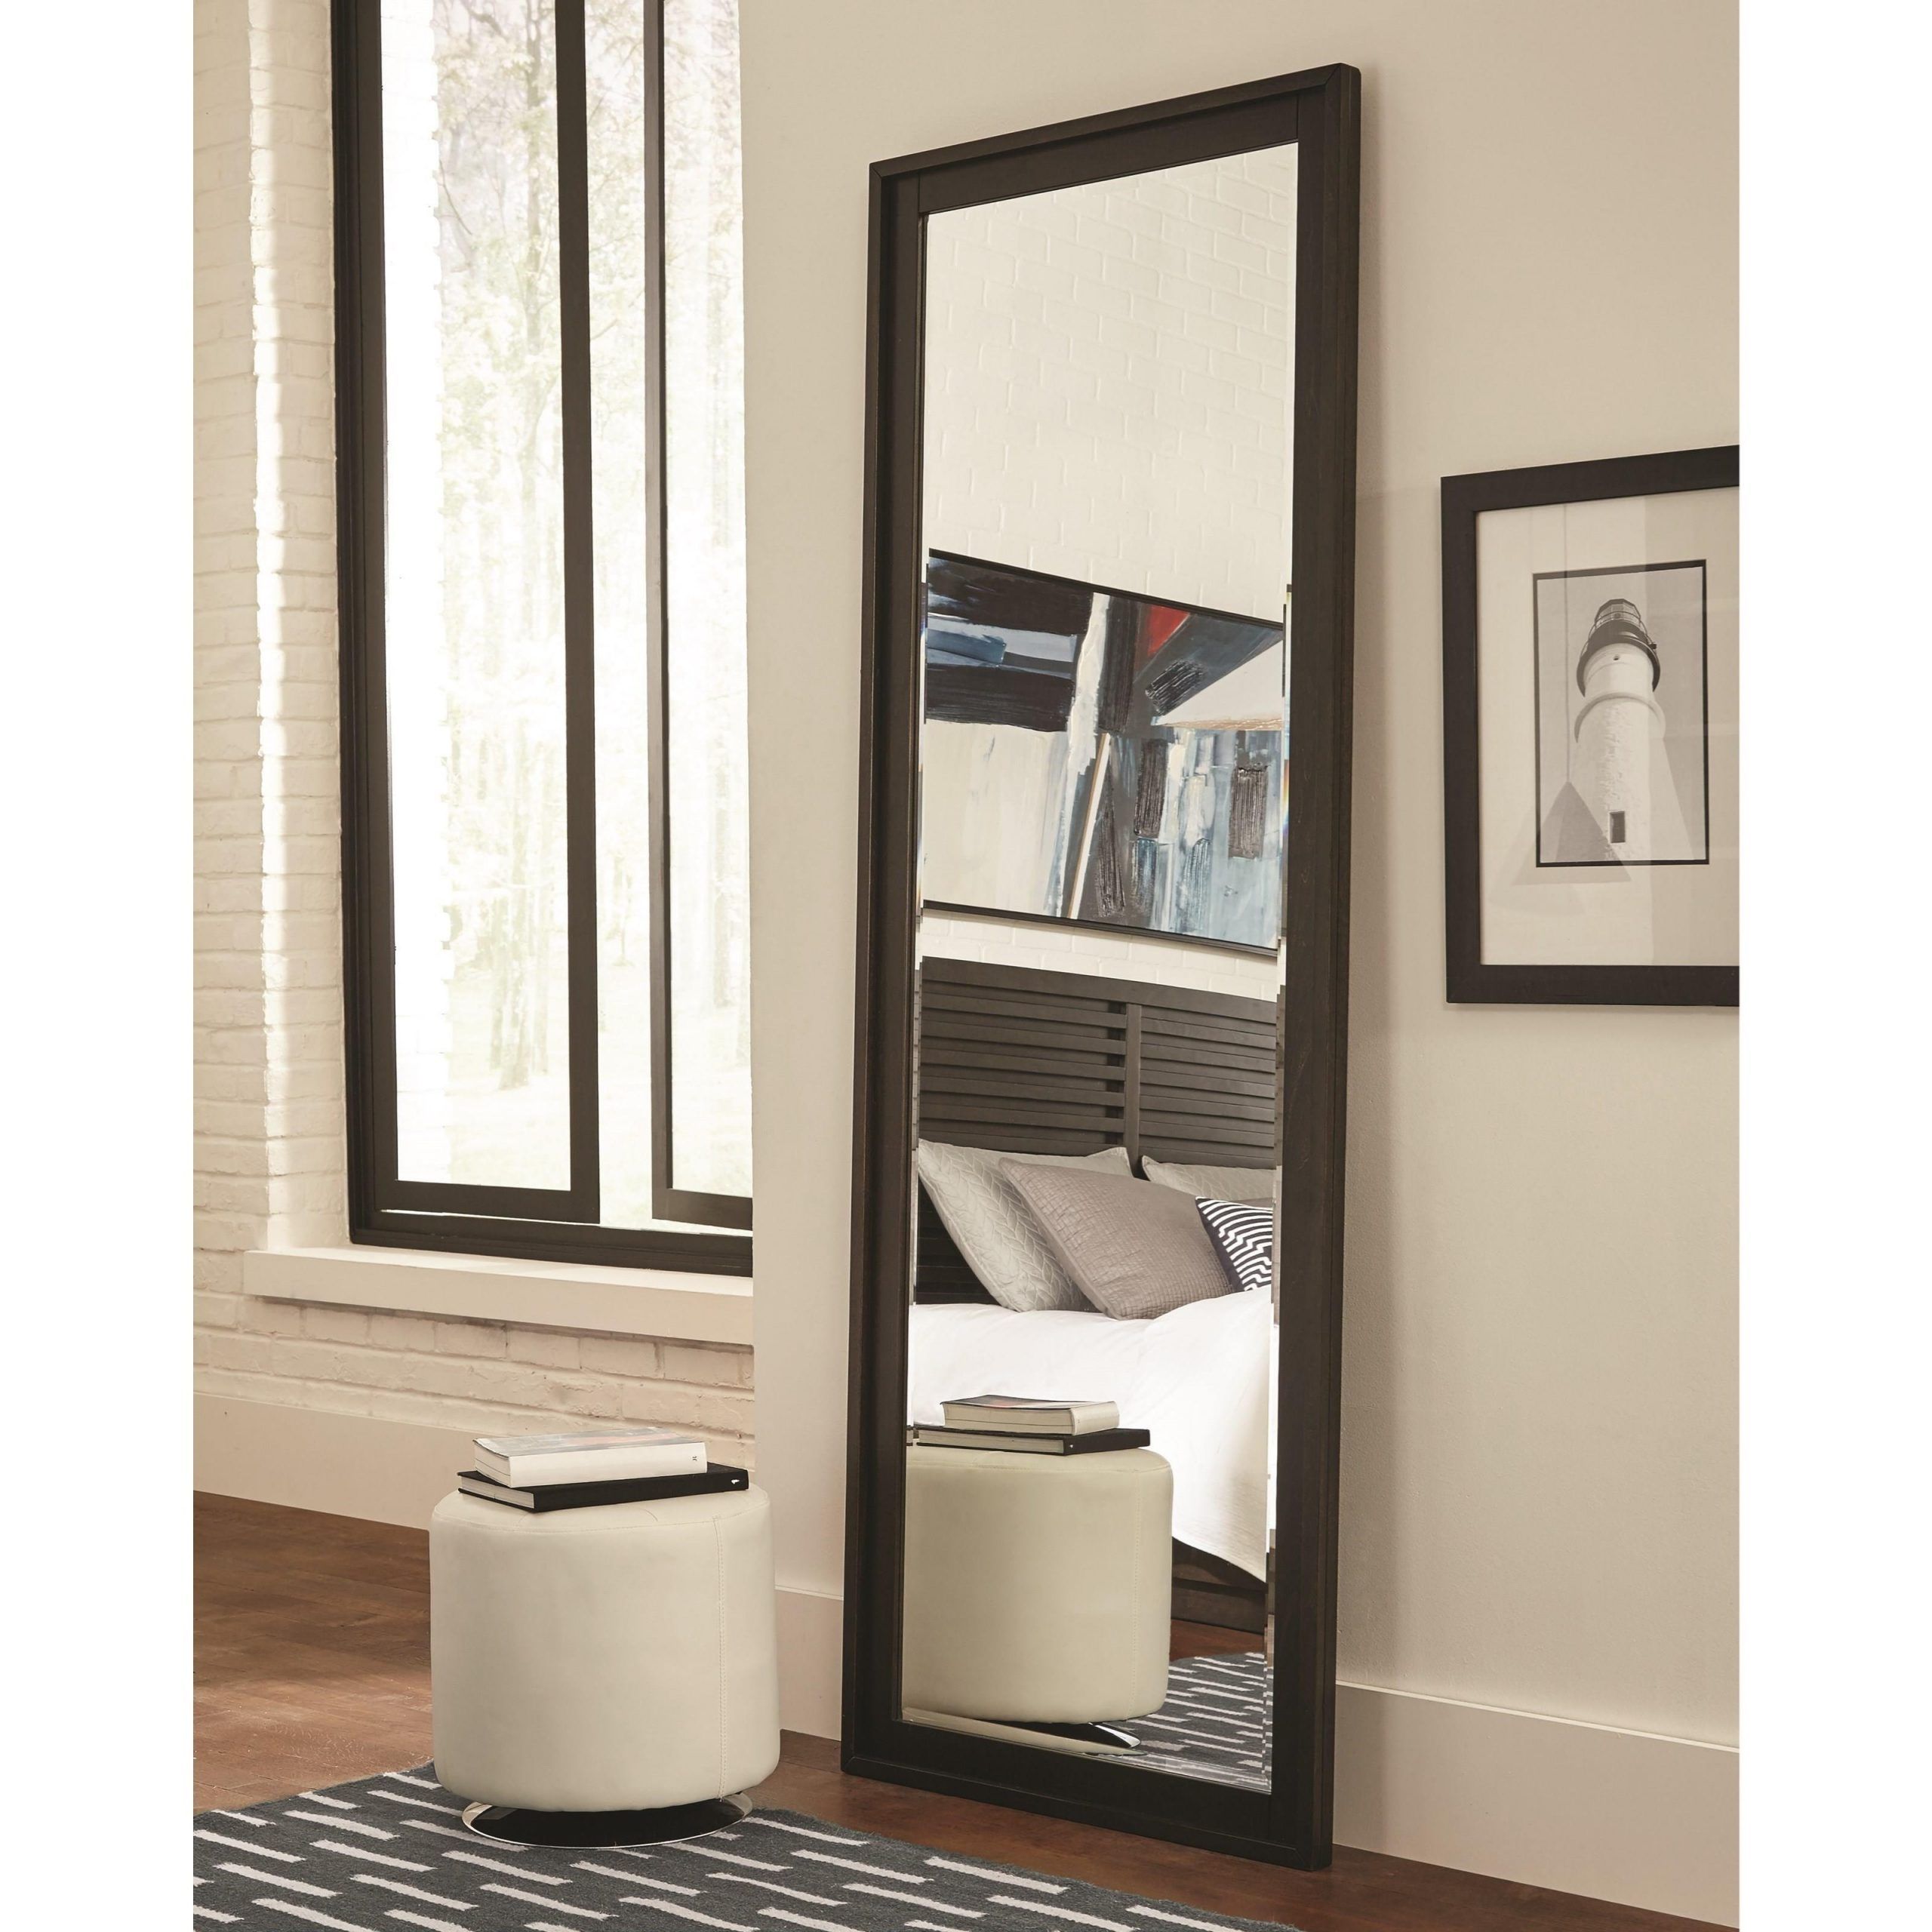 Matheson Full Length Floor Mirror | Quality Furniture At Affordable Throughout Full Length Floor Mirrors (View 5 of 15)